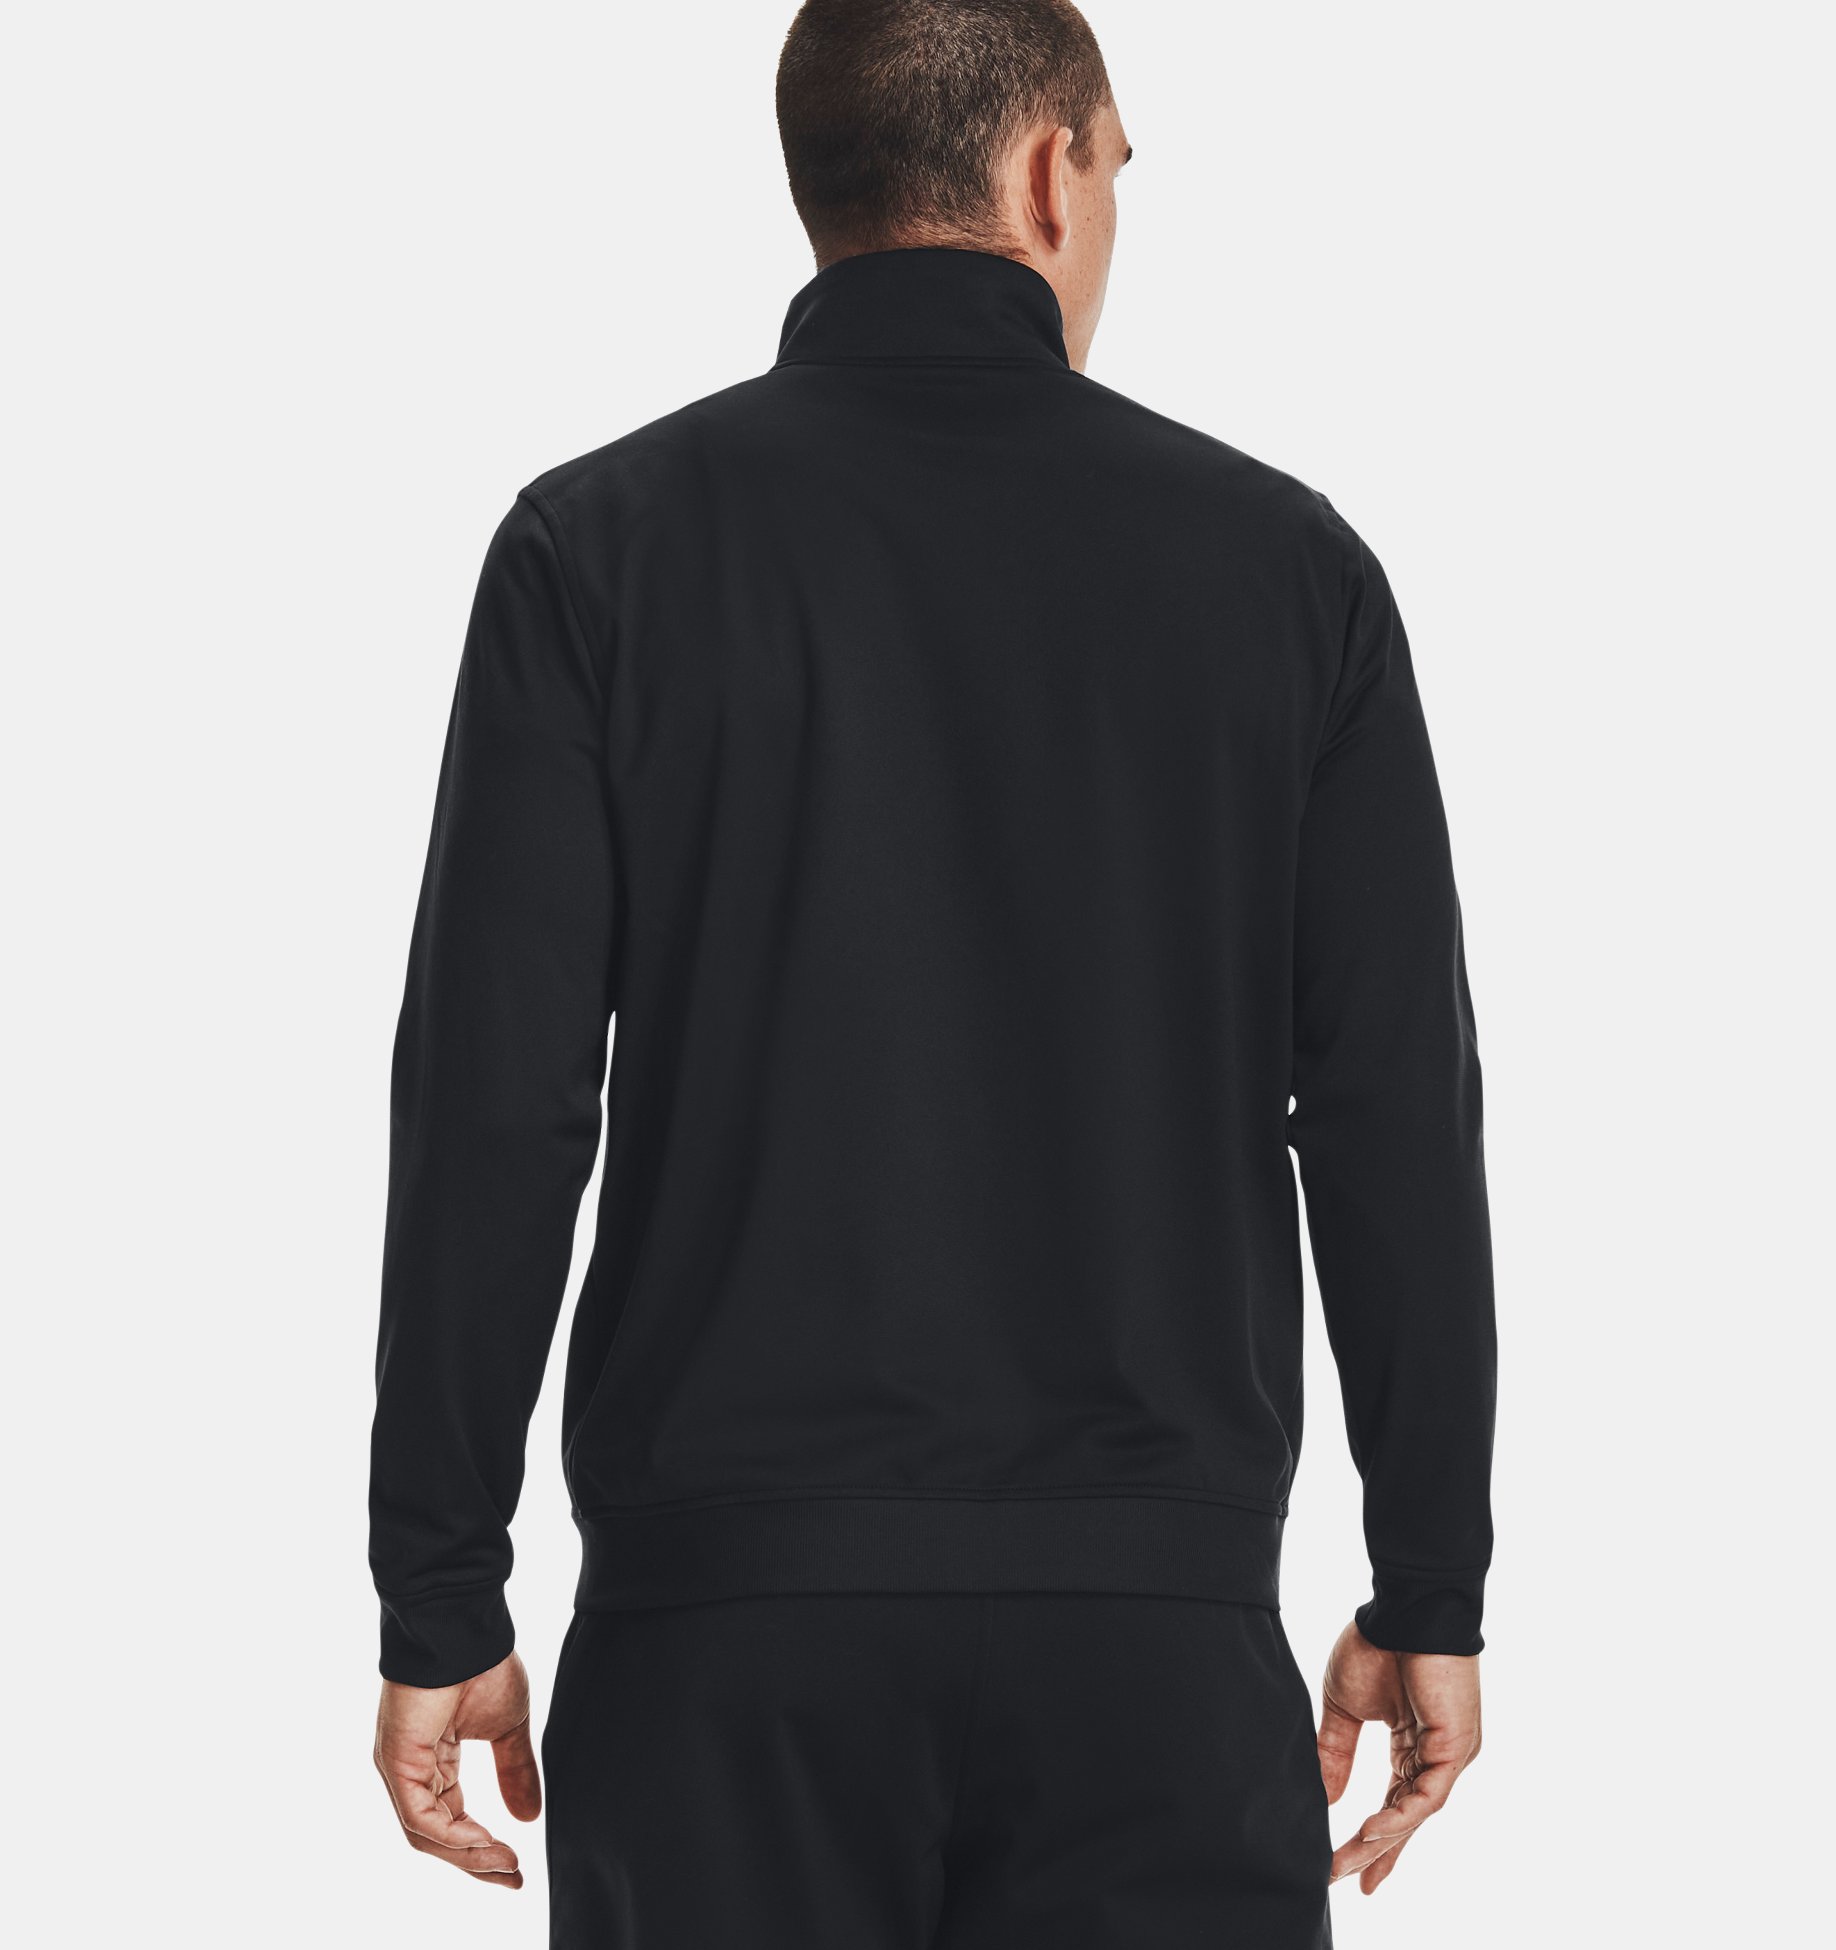 Under Armour Mens Sport Style Tricot Jacket Warm-up Top 